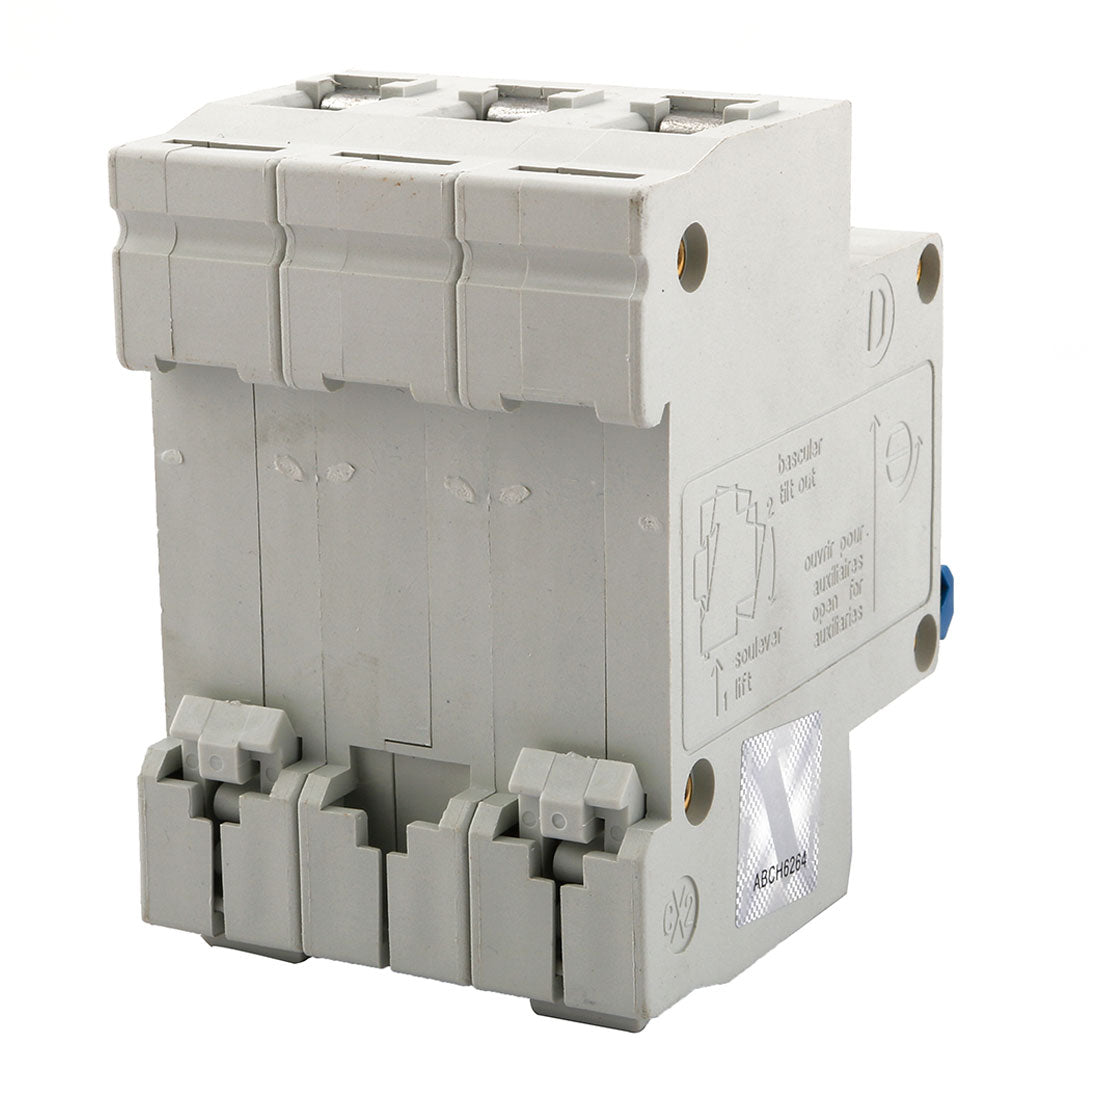 uxcell Uxcell Rail Mounting On/Off Switch 3 Pole DIN MCB Circuit Breaker Overload Protector AC 400V 10A DZ47-63 C10